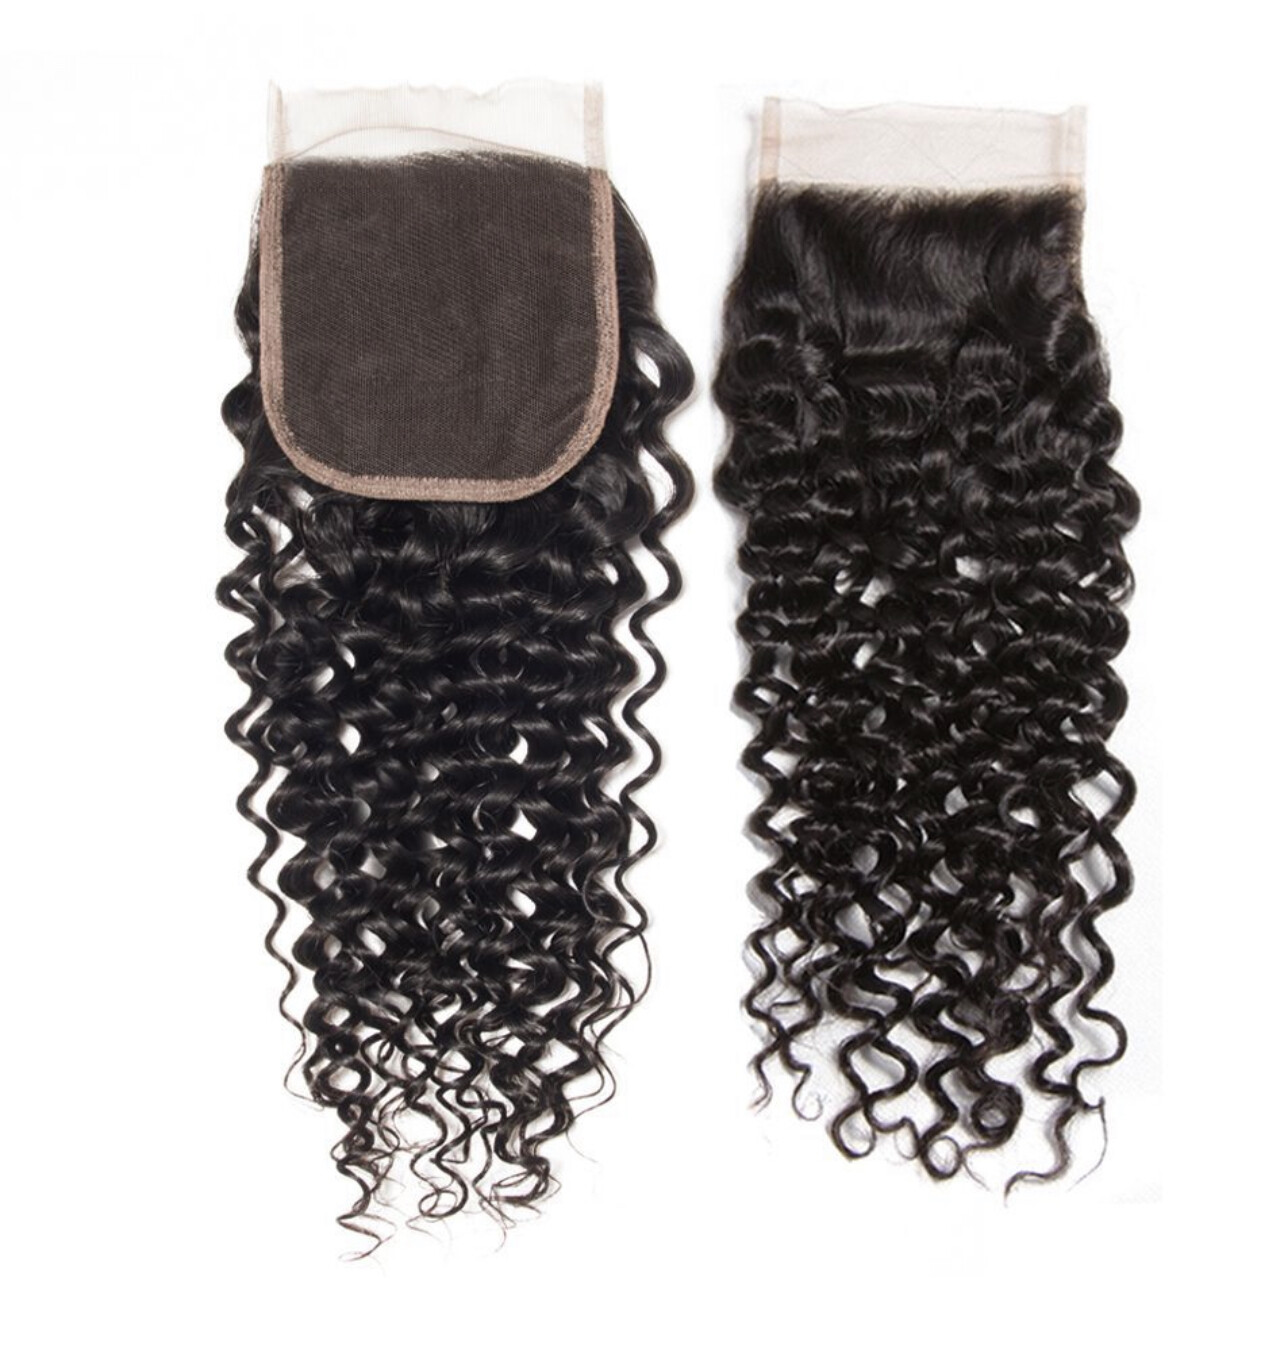 BACK TO SCHOOL 4X4 TRANSPARENT CURLY, DW, & LW CLOSURE SALES